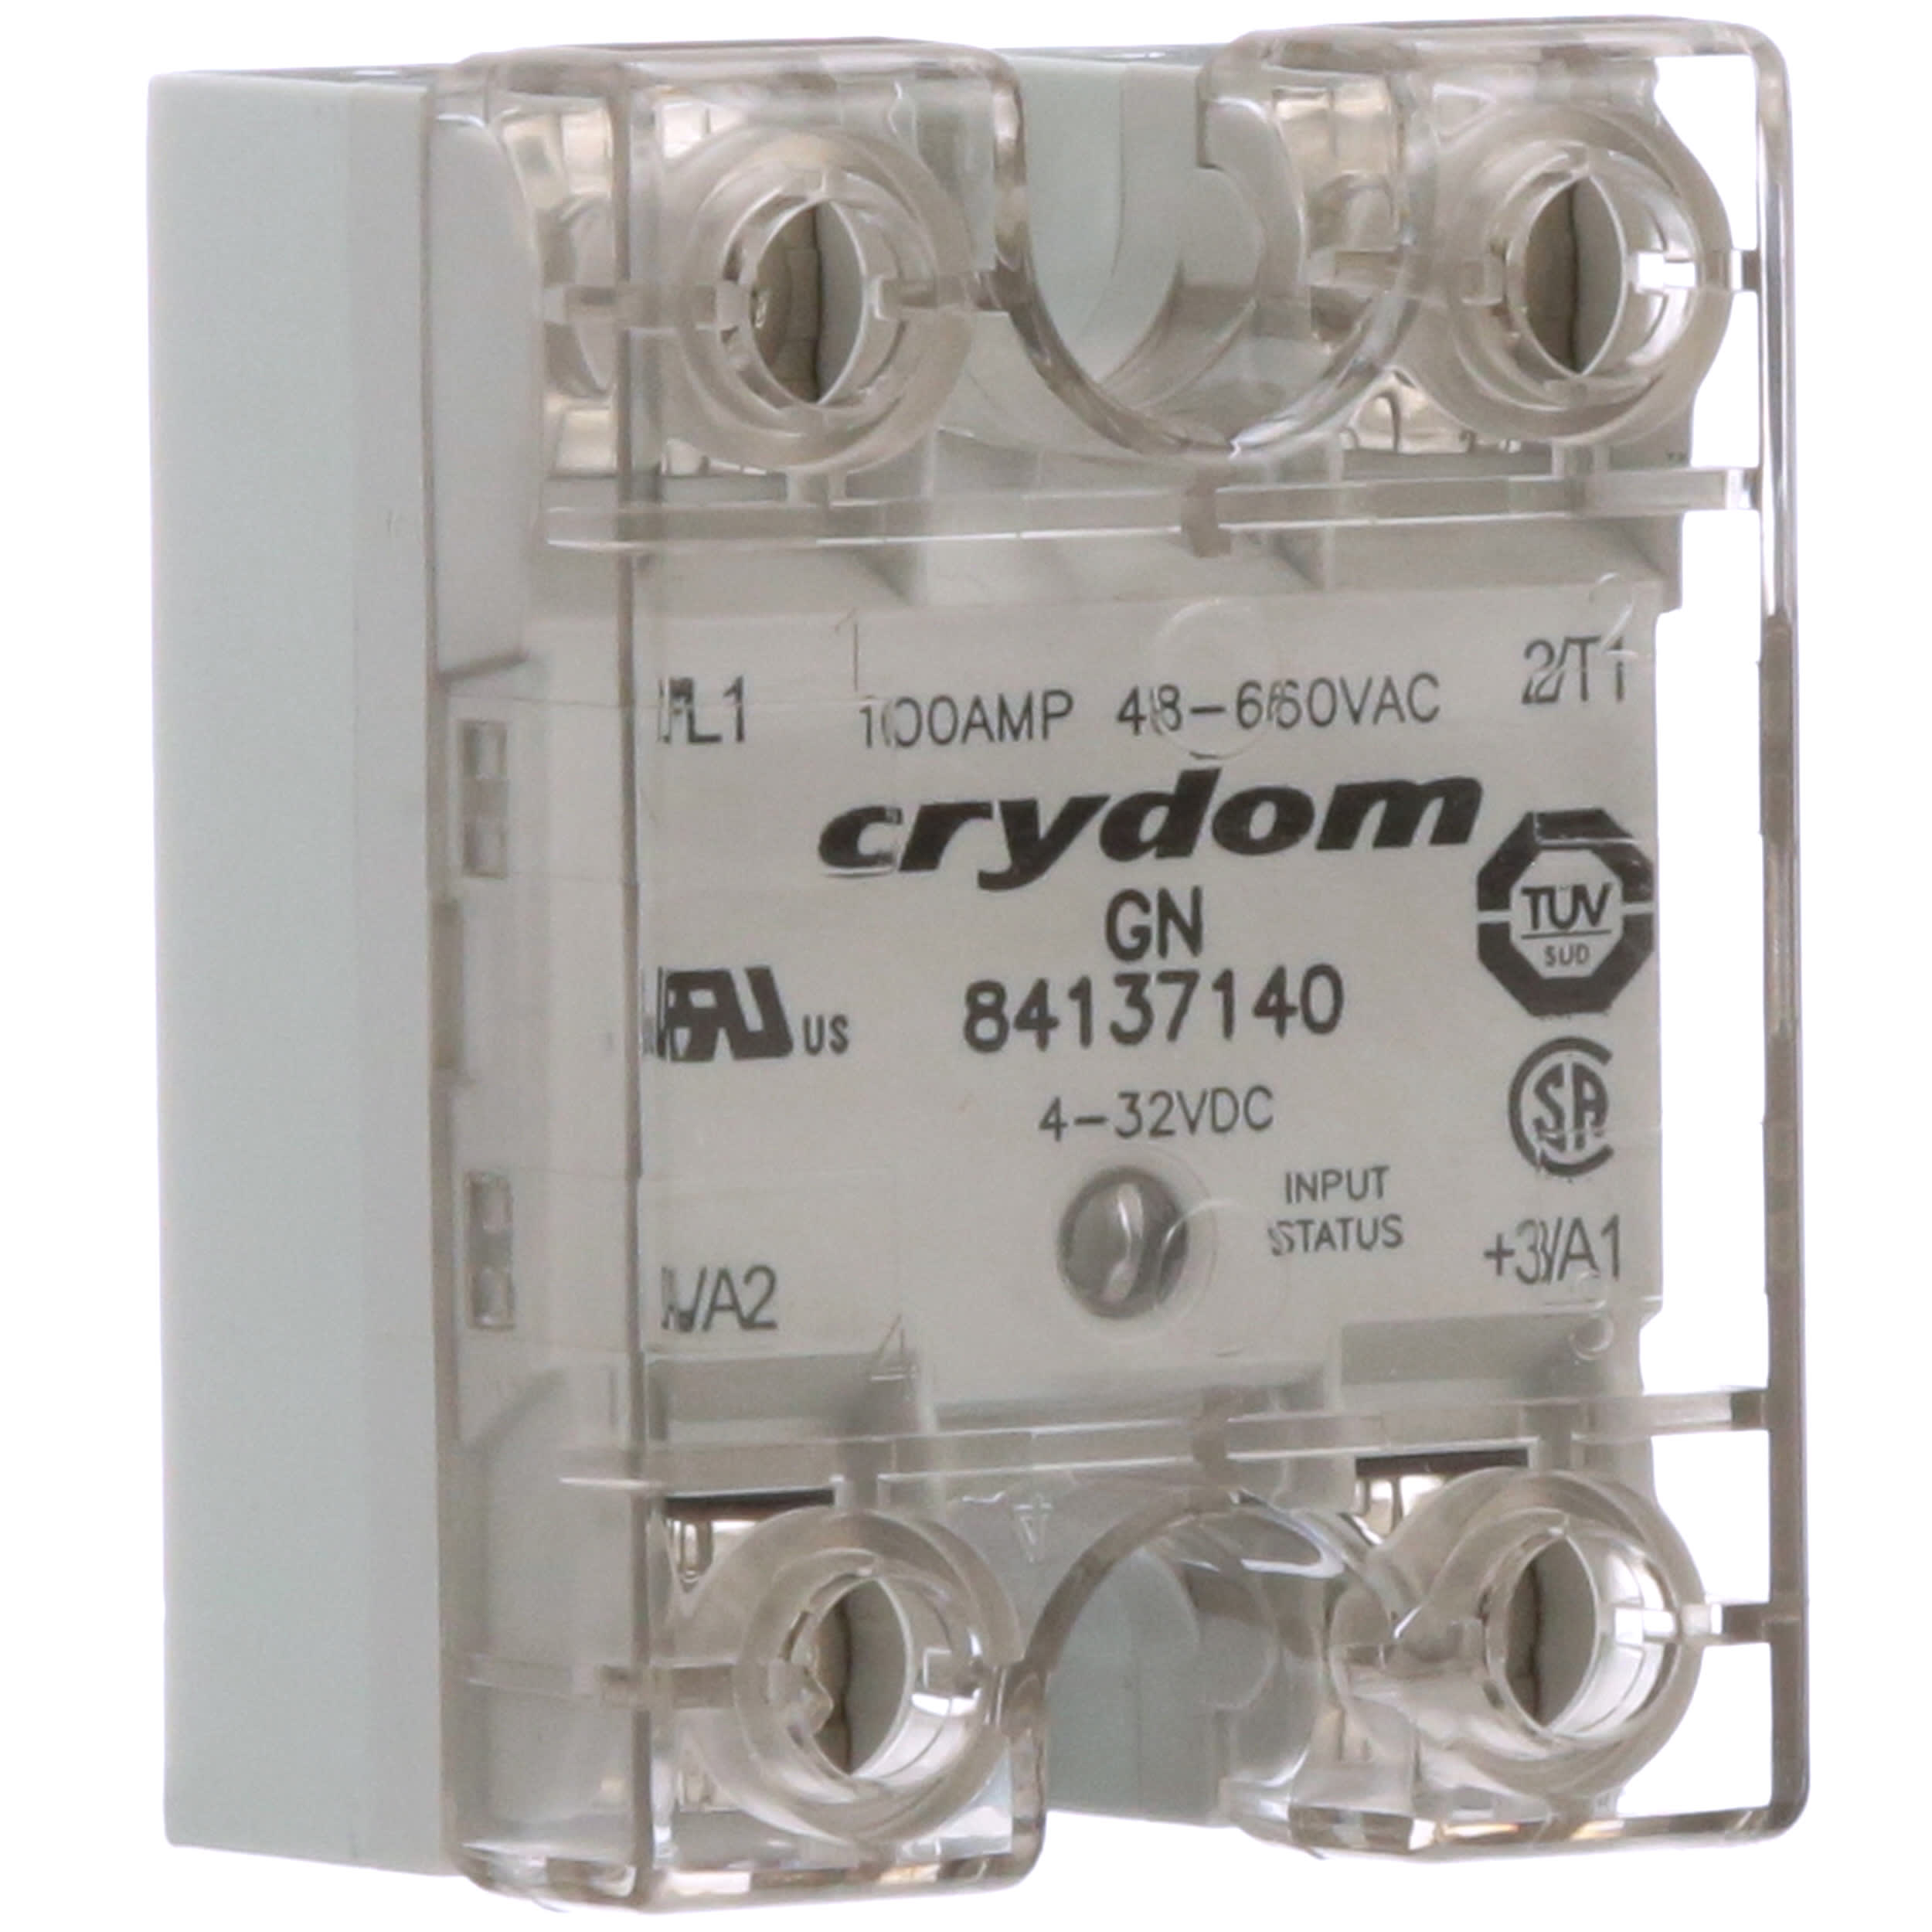 DC in GN IP00 SSR 84134310 Sensata/Crydom Solid State Relay More Than 60 V 25A/480Vac RN